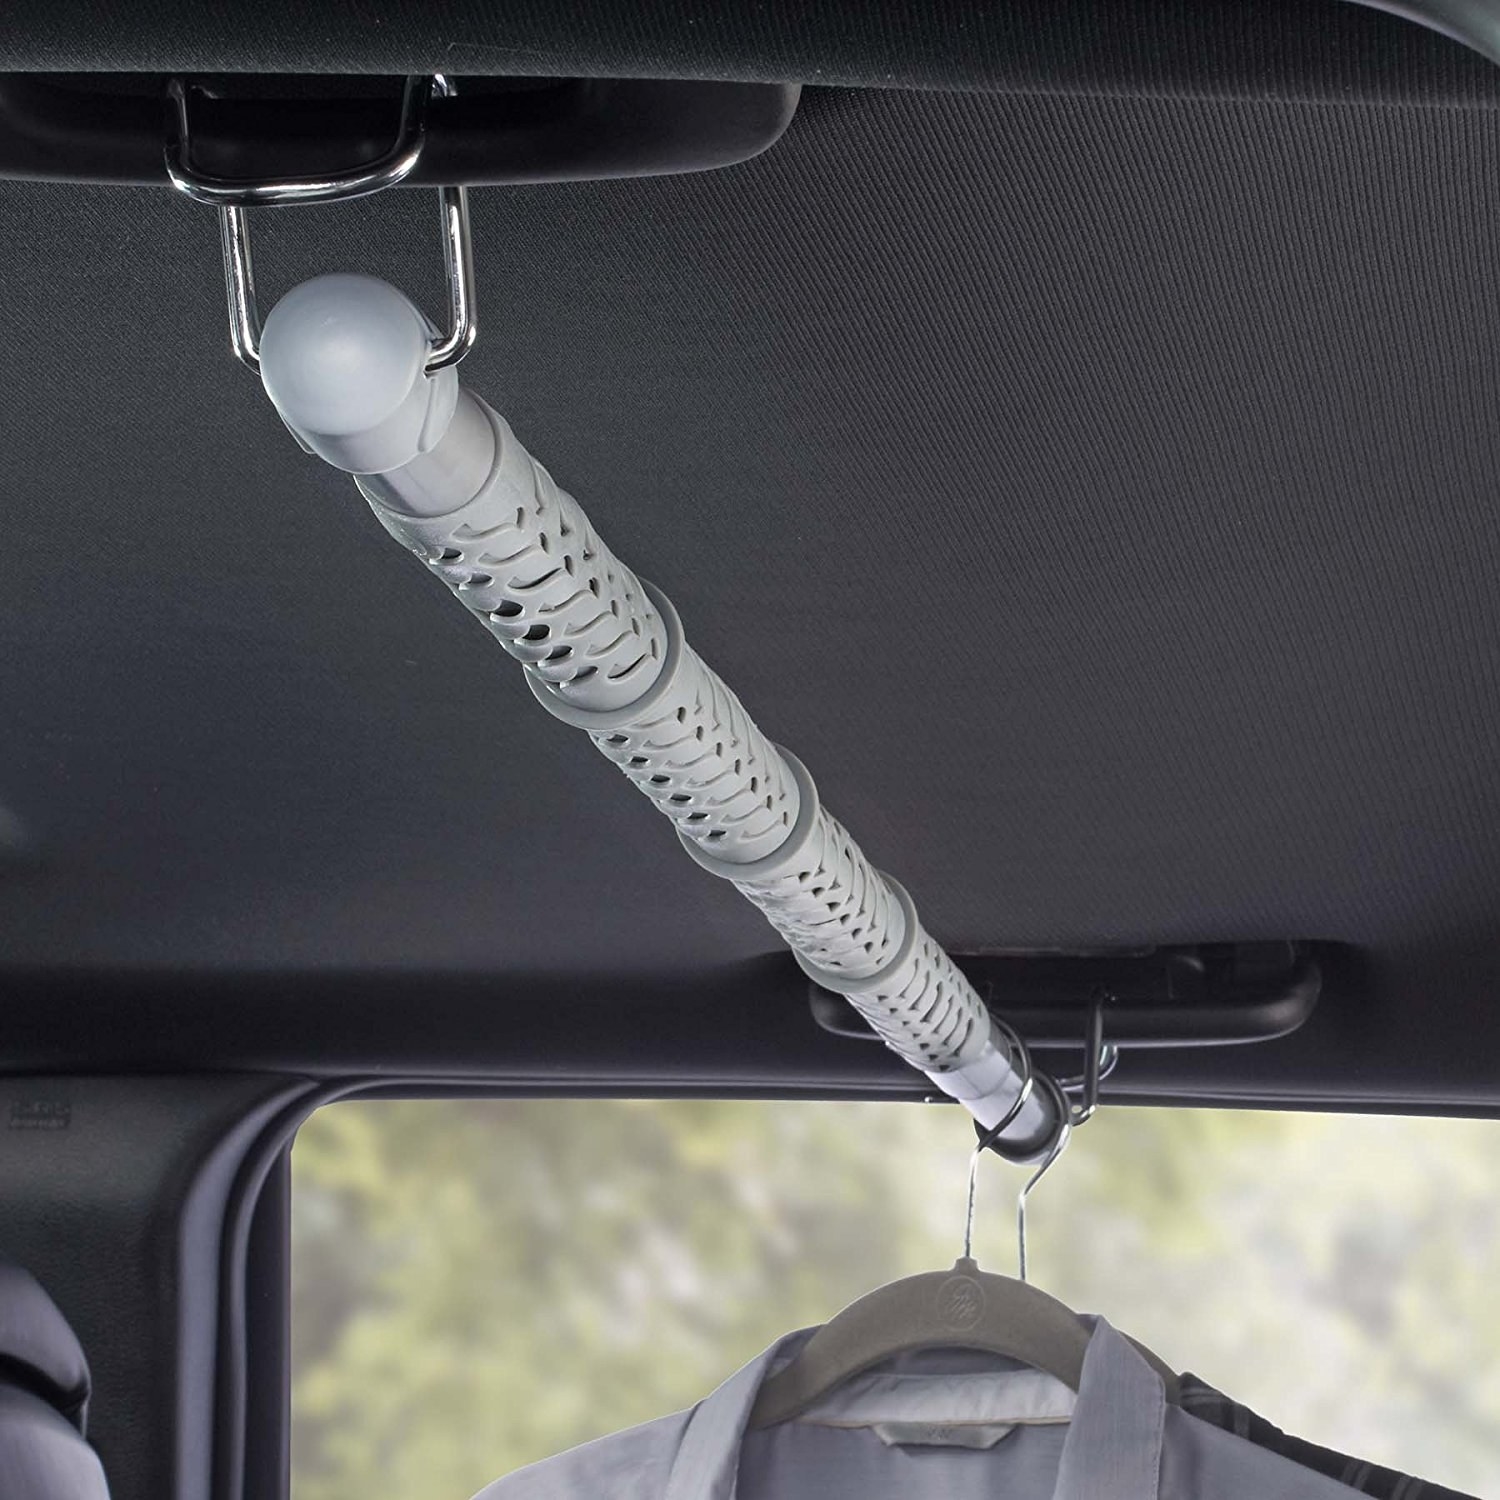 5 car accessories to streamline your drive time